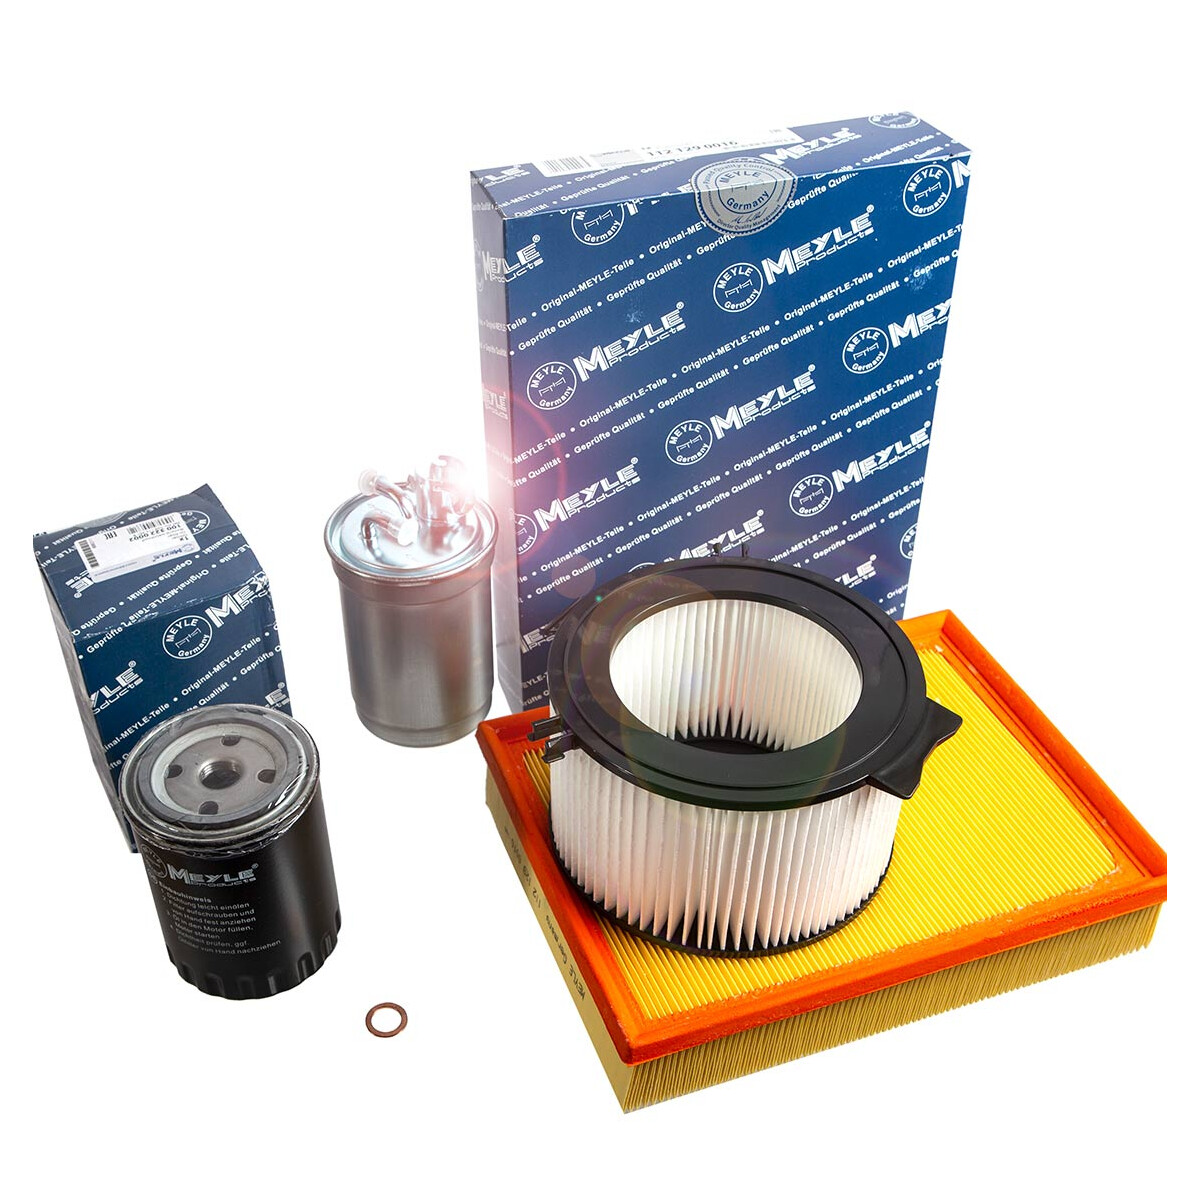 T4 Engine Service Kit for 1,9l TD Diesel with ABL Engine, 01.96 - 6.0,  42,60 €